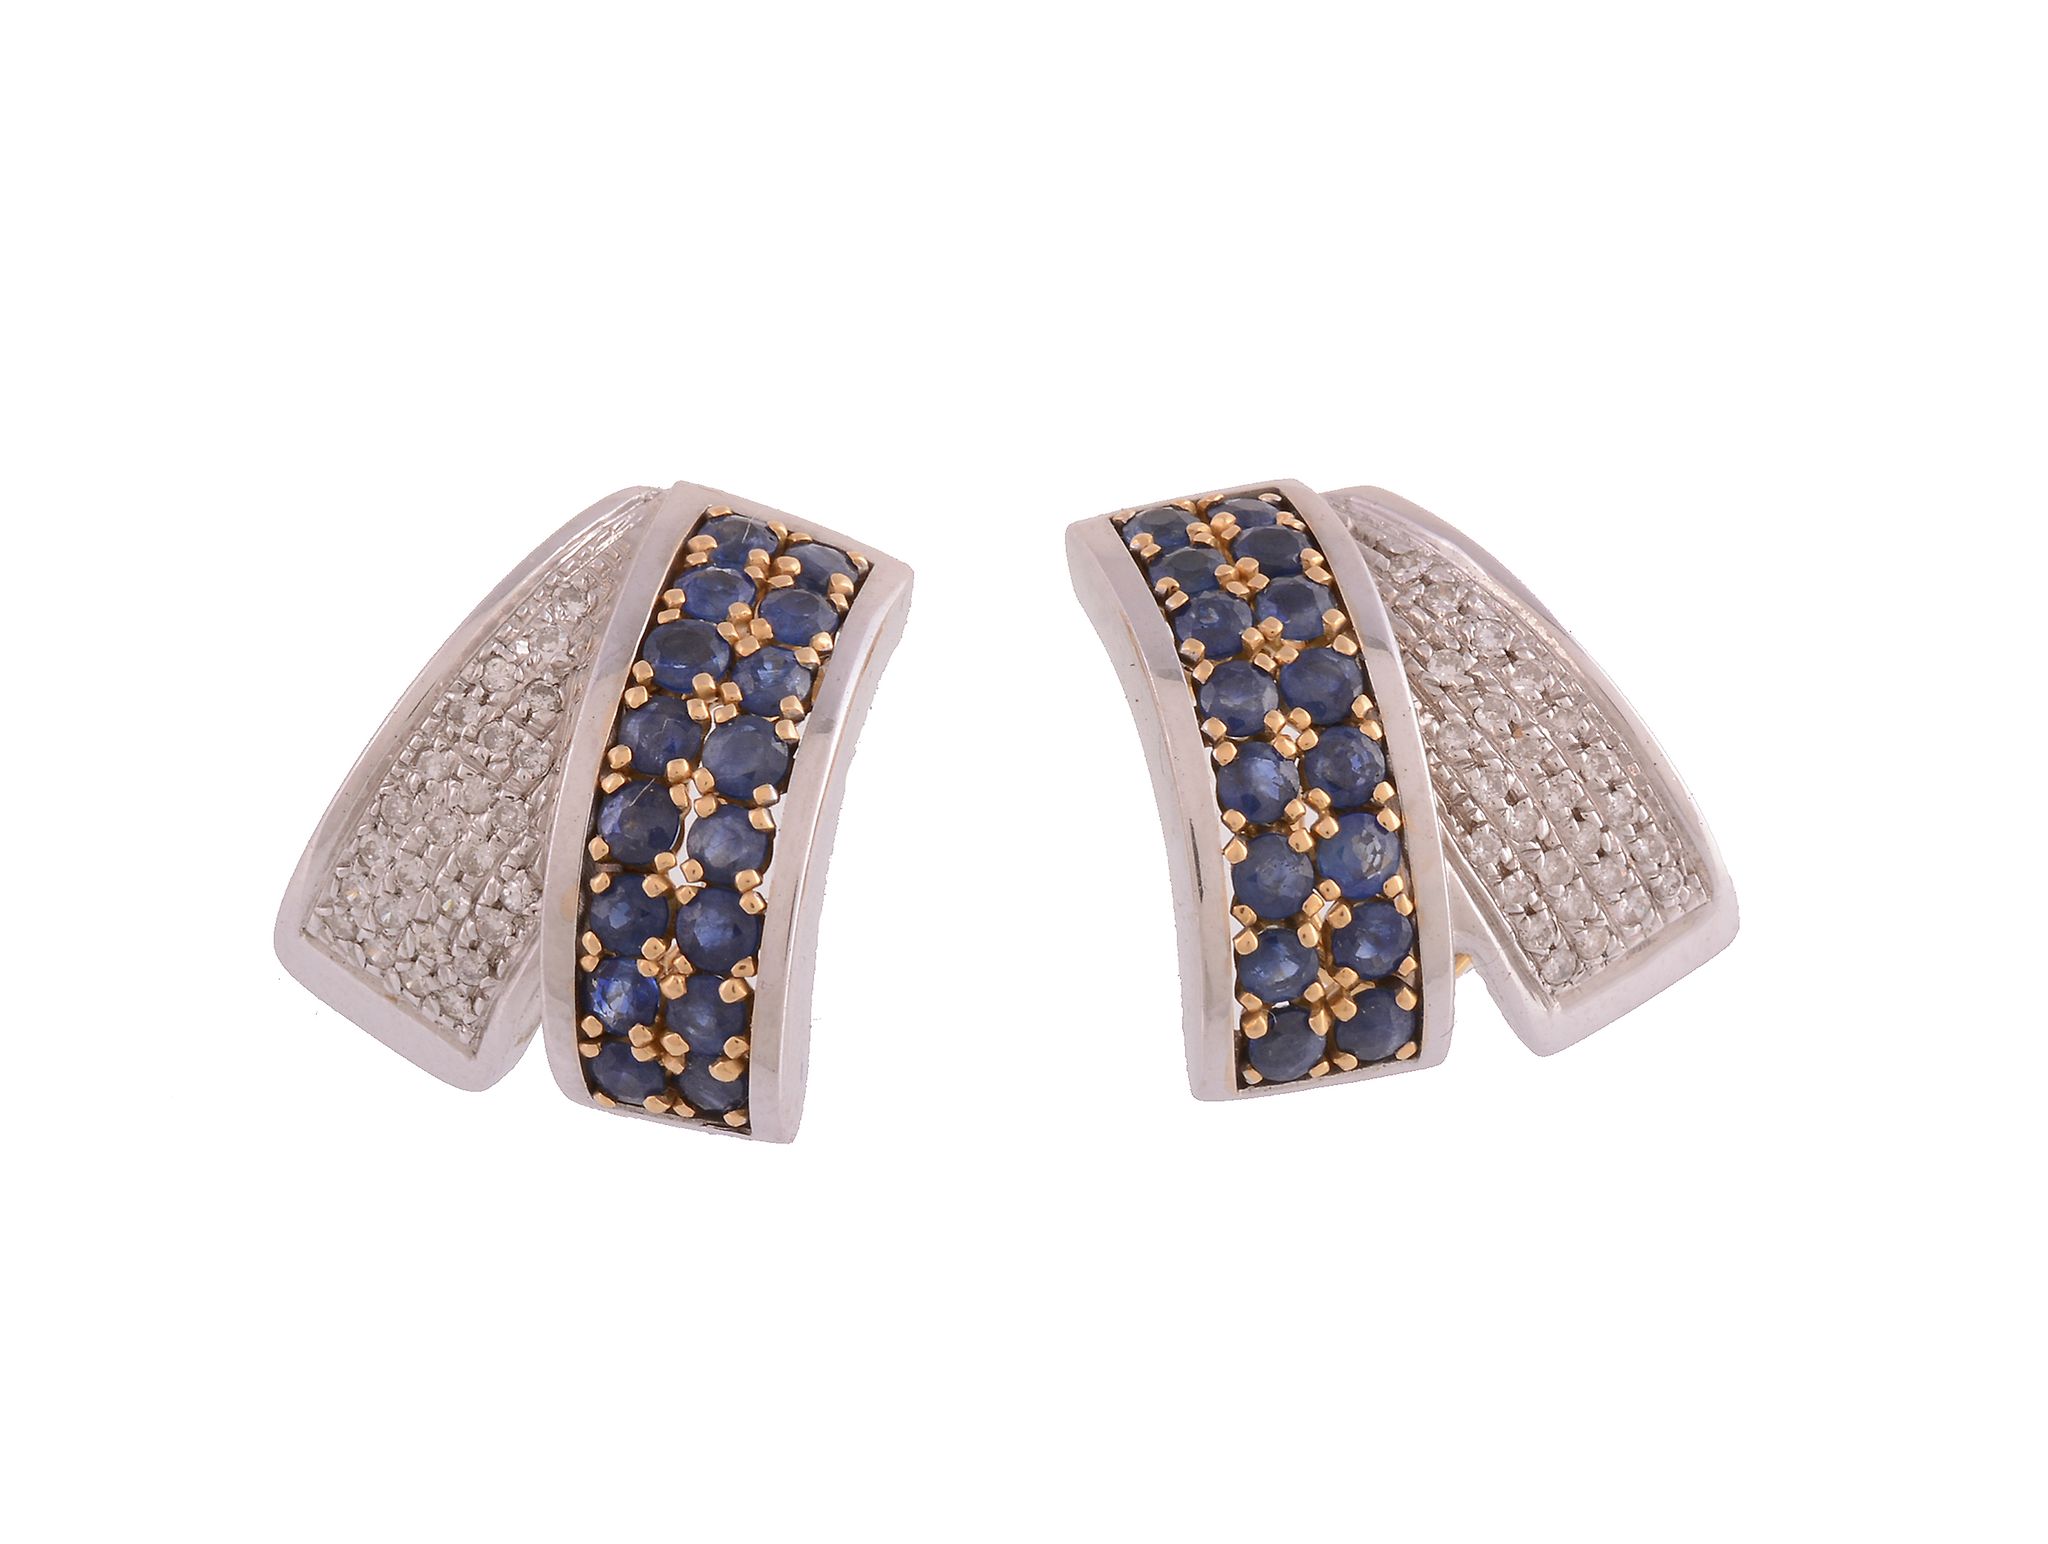 A pair of sapphire and diamond earrings, the overlapping panels set with brilliant cut diamonds and